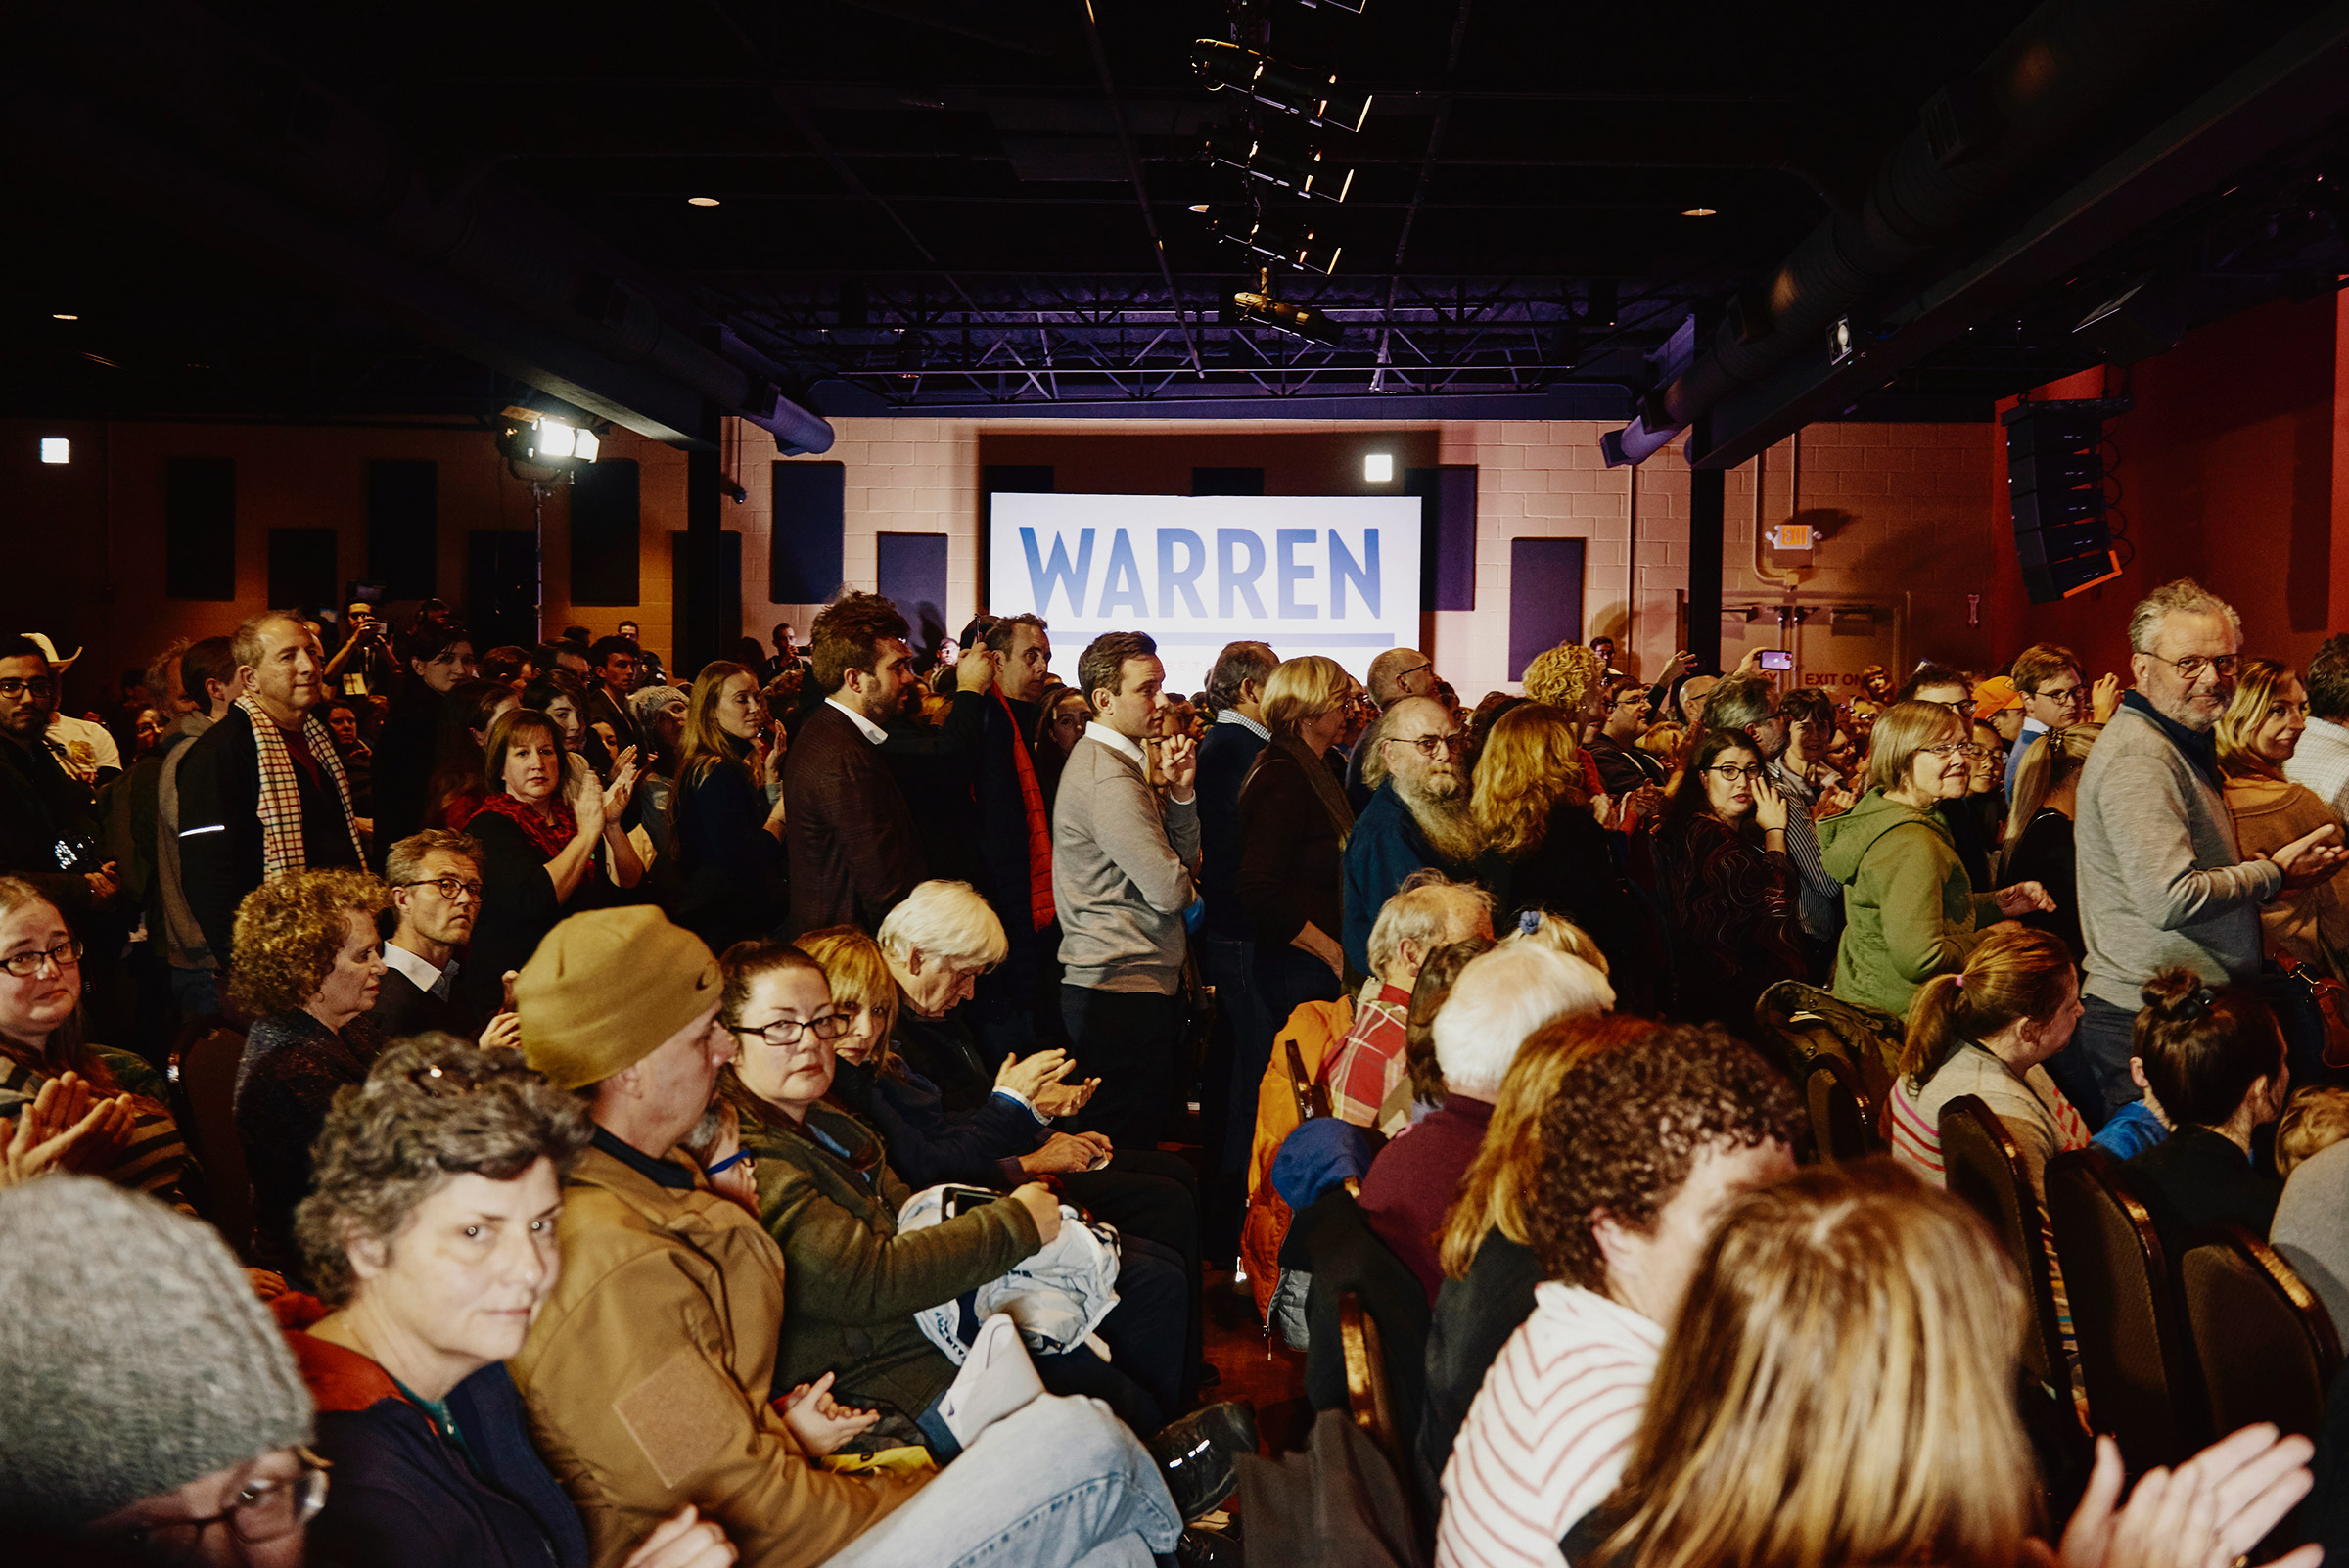 Guests at Elizabeth Warren's Derry GOTV Event at the Tupelo Music Hall in Derry, NH on Feb. 6, 2020. (Tony Luong for TIME)